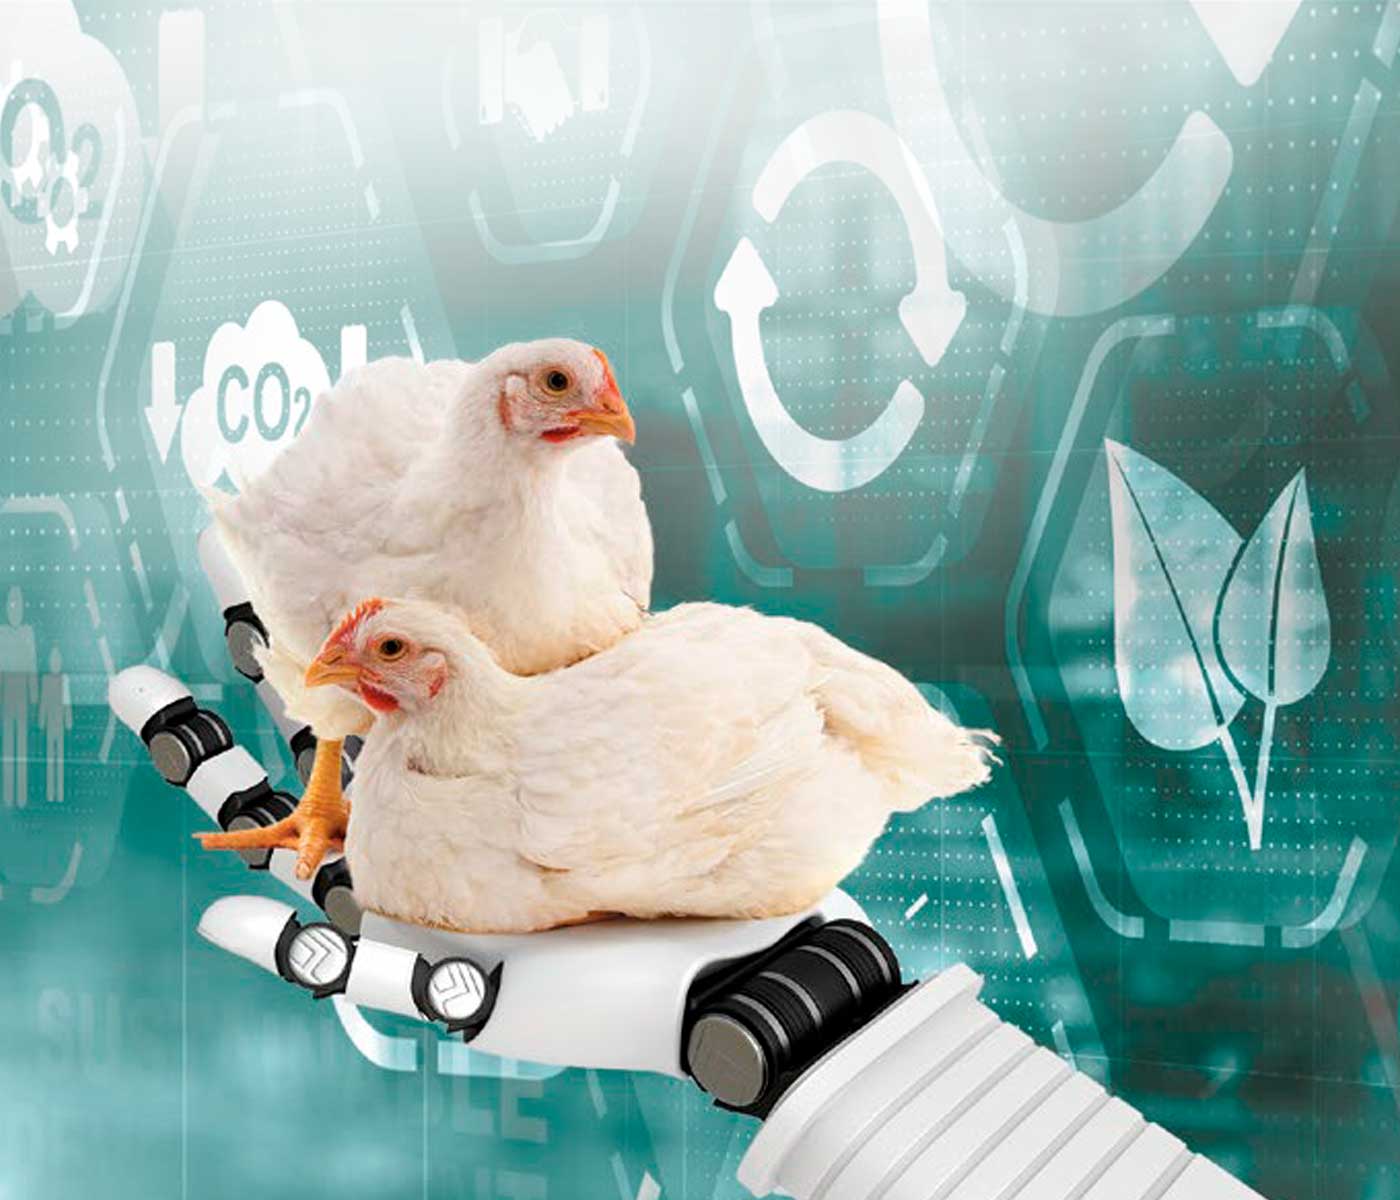 Sustainability for the Poultry Industry